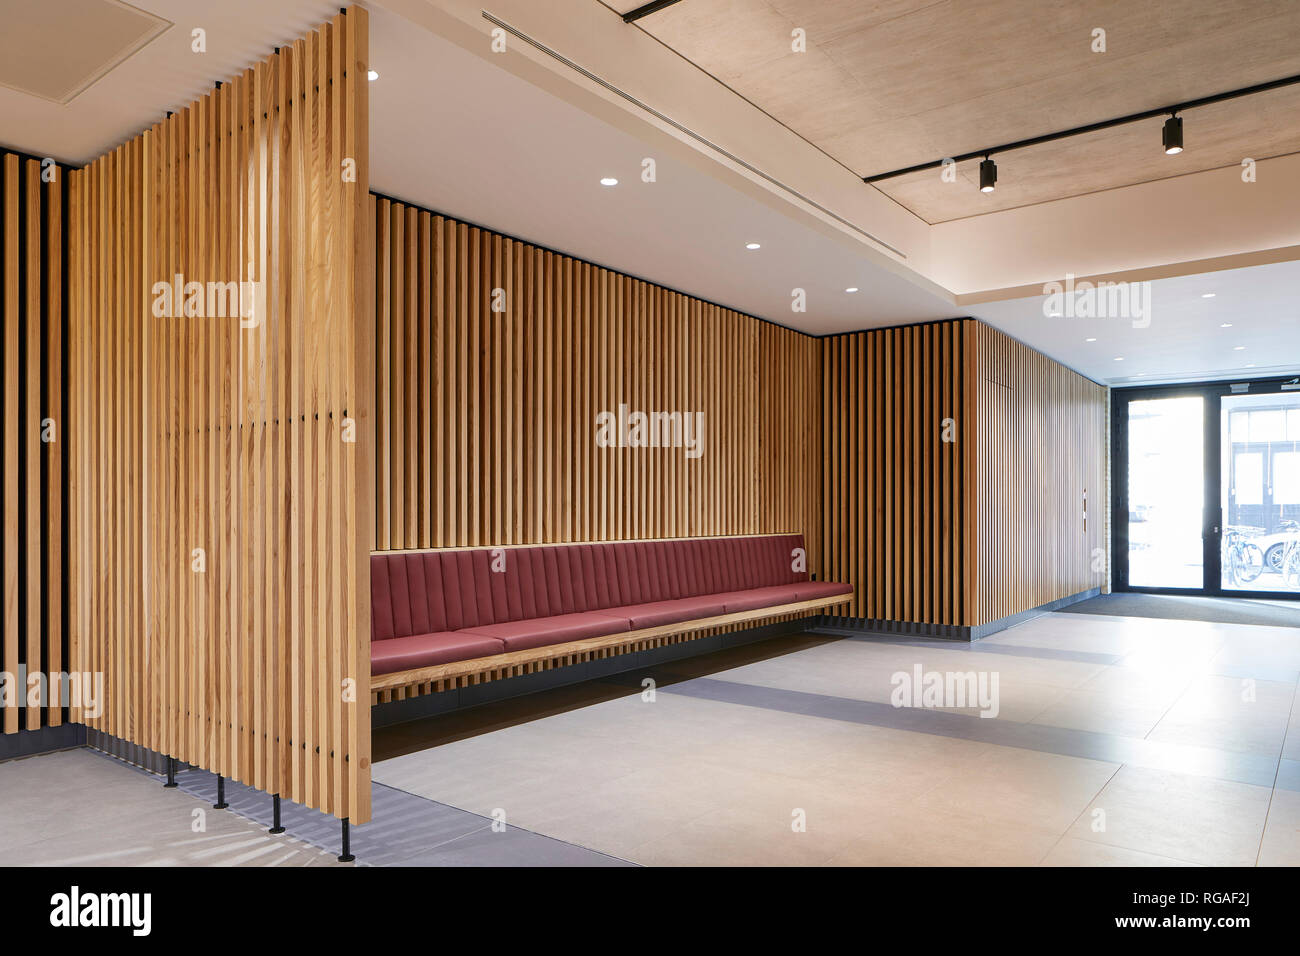 Timber panelling and partition with bench in reception area. Paul Street, London, United Kingdom. Architect: Stiff + Trevillion Architects, 2018. Stock Photo